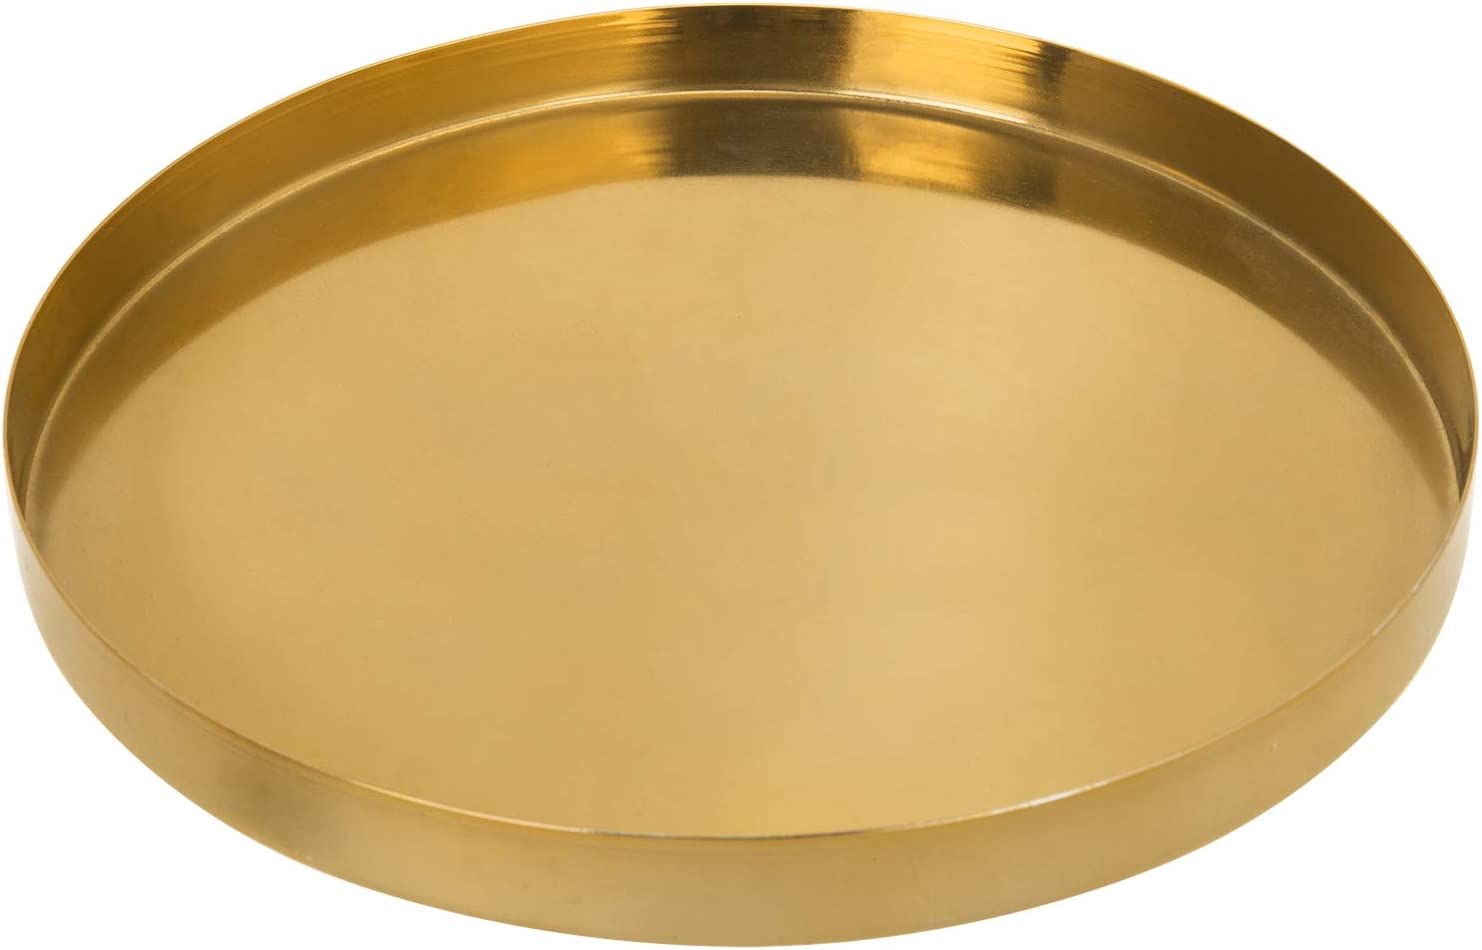 MyGift Brushed Brass Metal Decorative Tray, 11 inch Round Serving Tray - Handcrafted in India | Amazon (US)